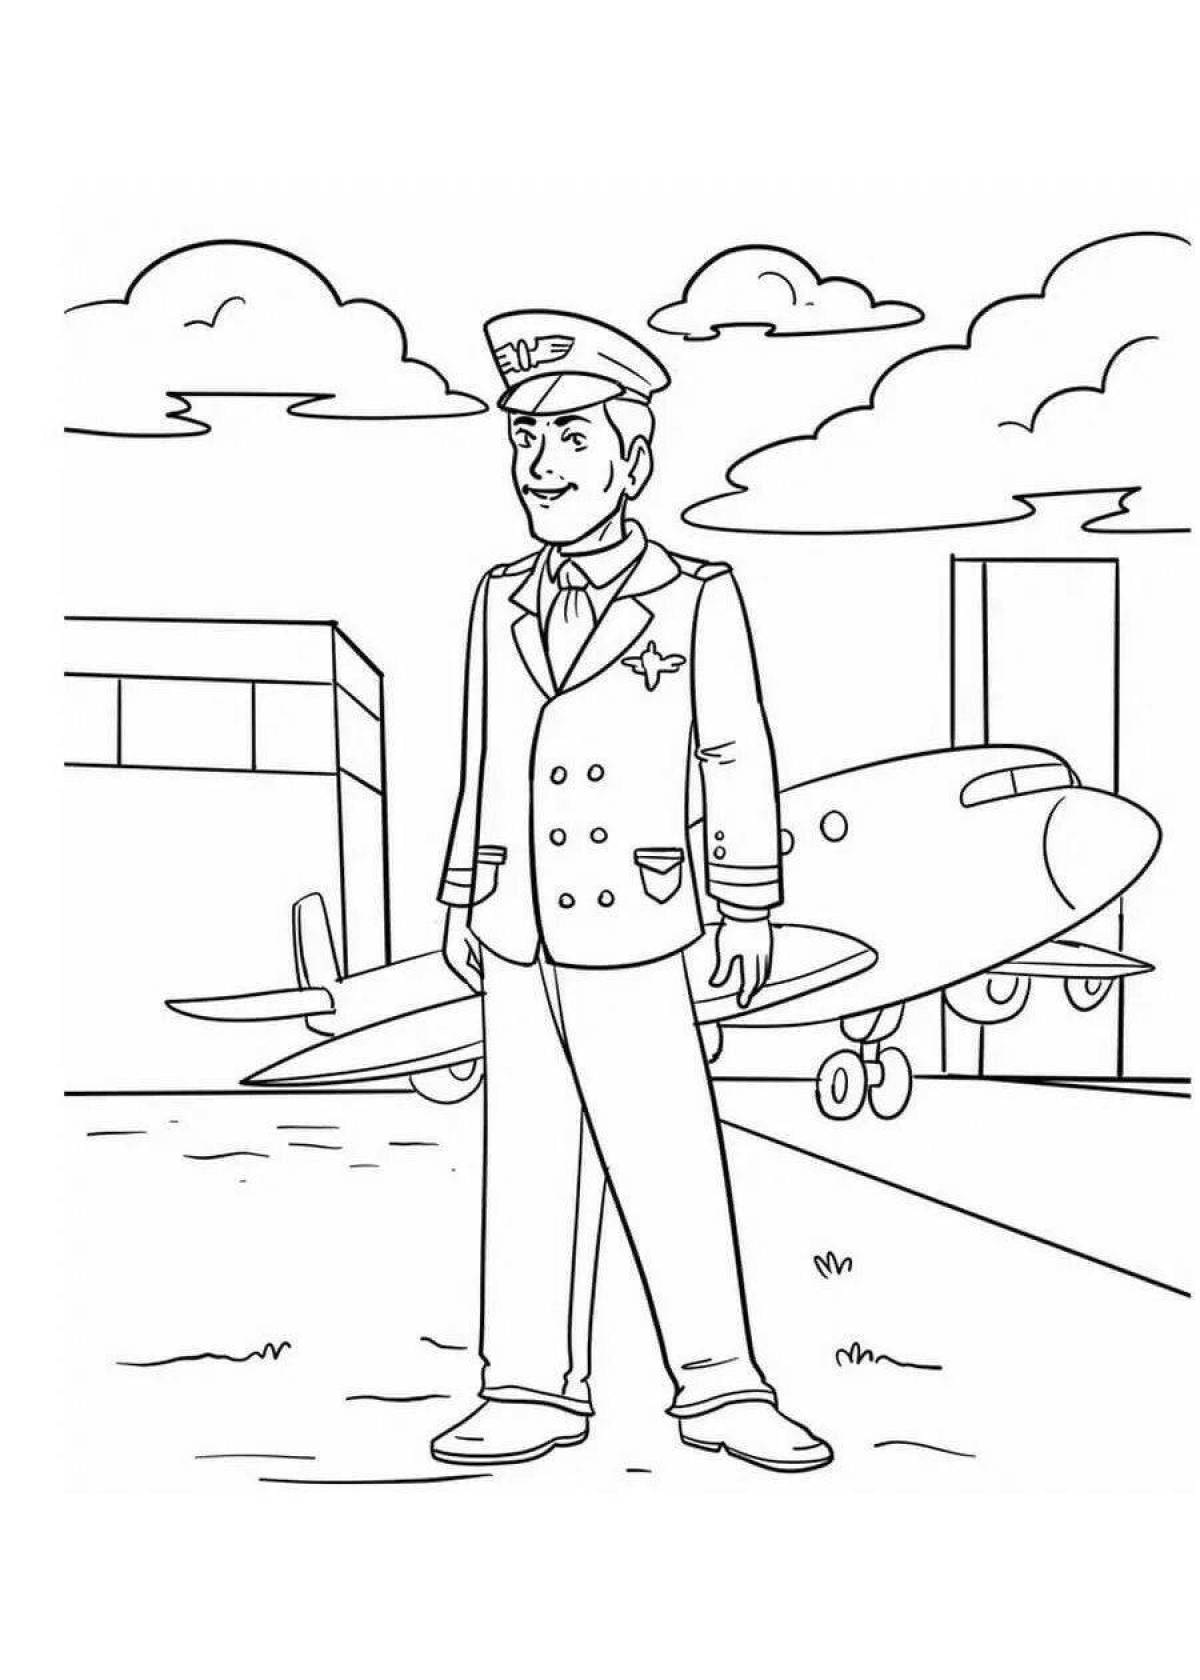 Colorful military profession coloring book for kids